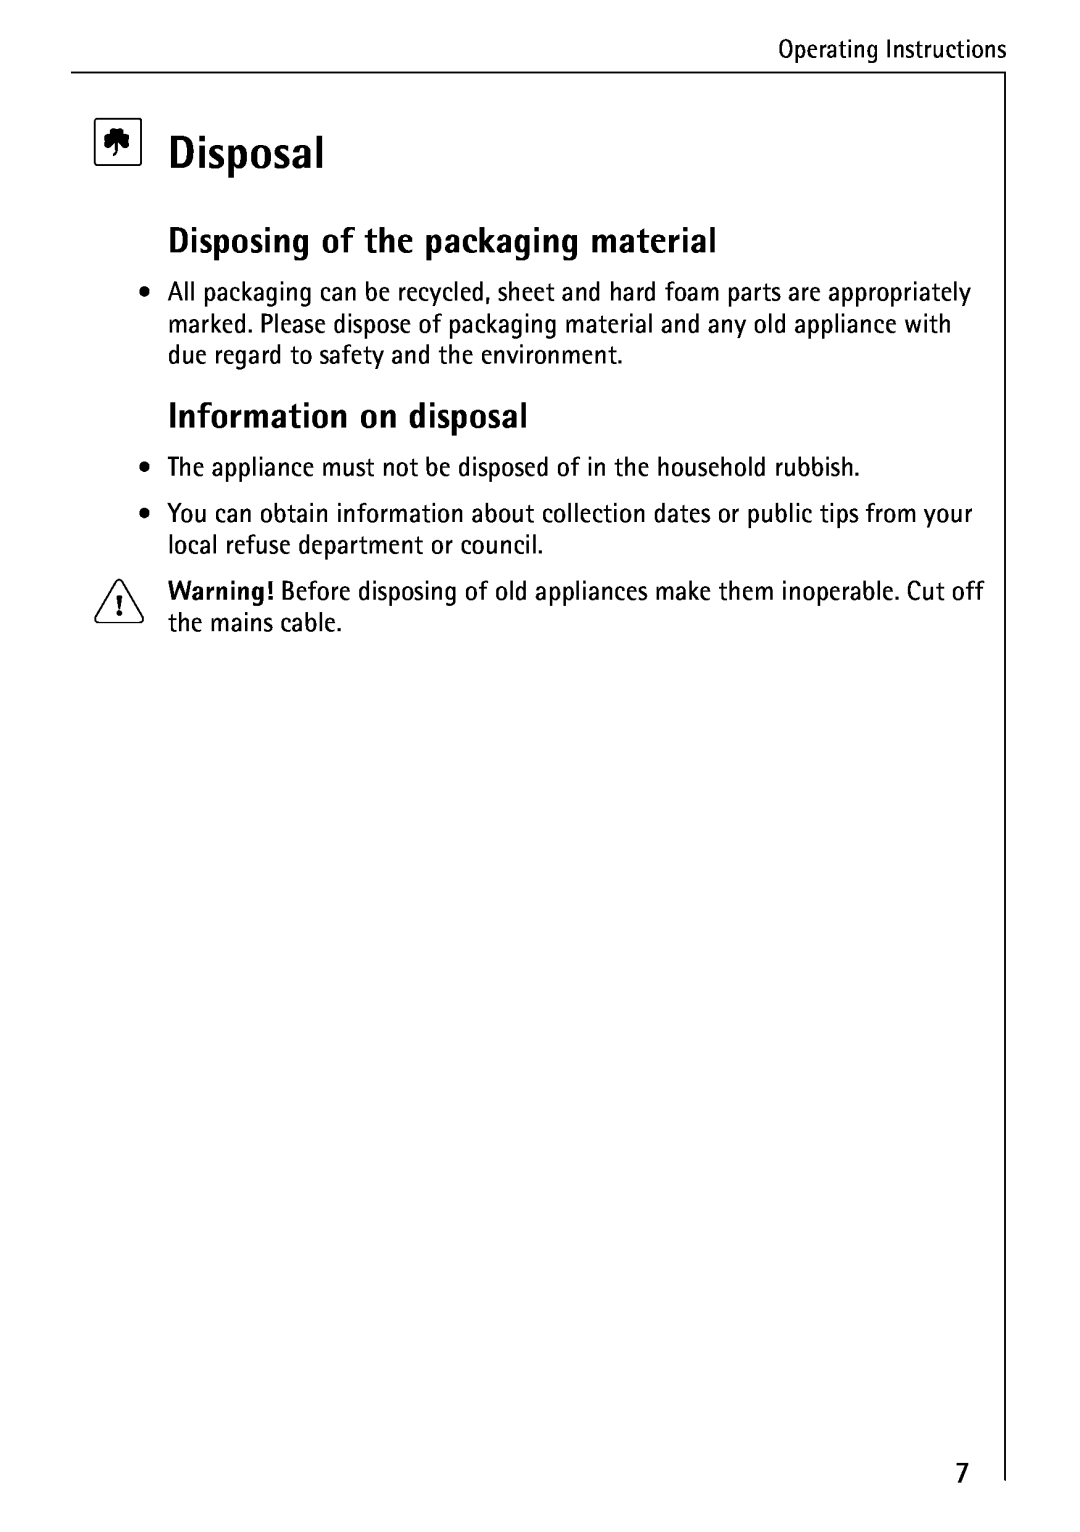 AEG 95300KA-MN operating instructions Disposal, Disposing of the packaging material, Information on disposal 